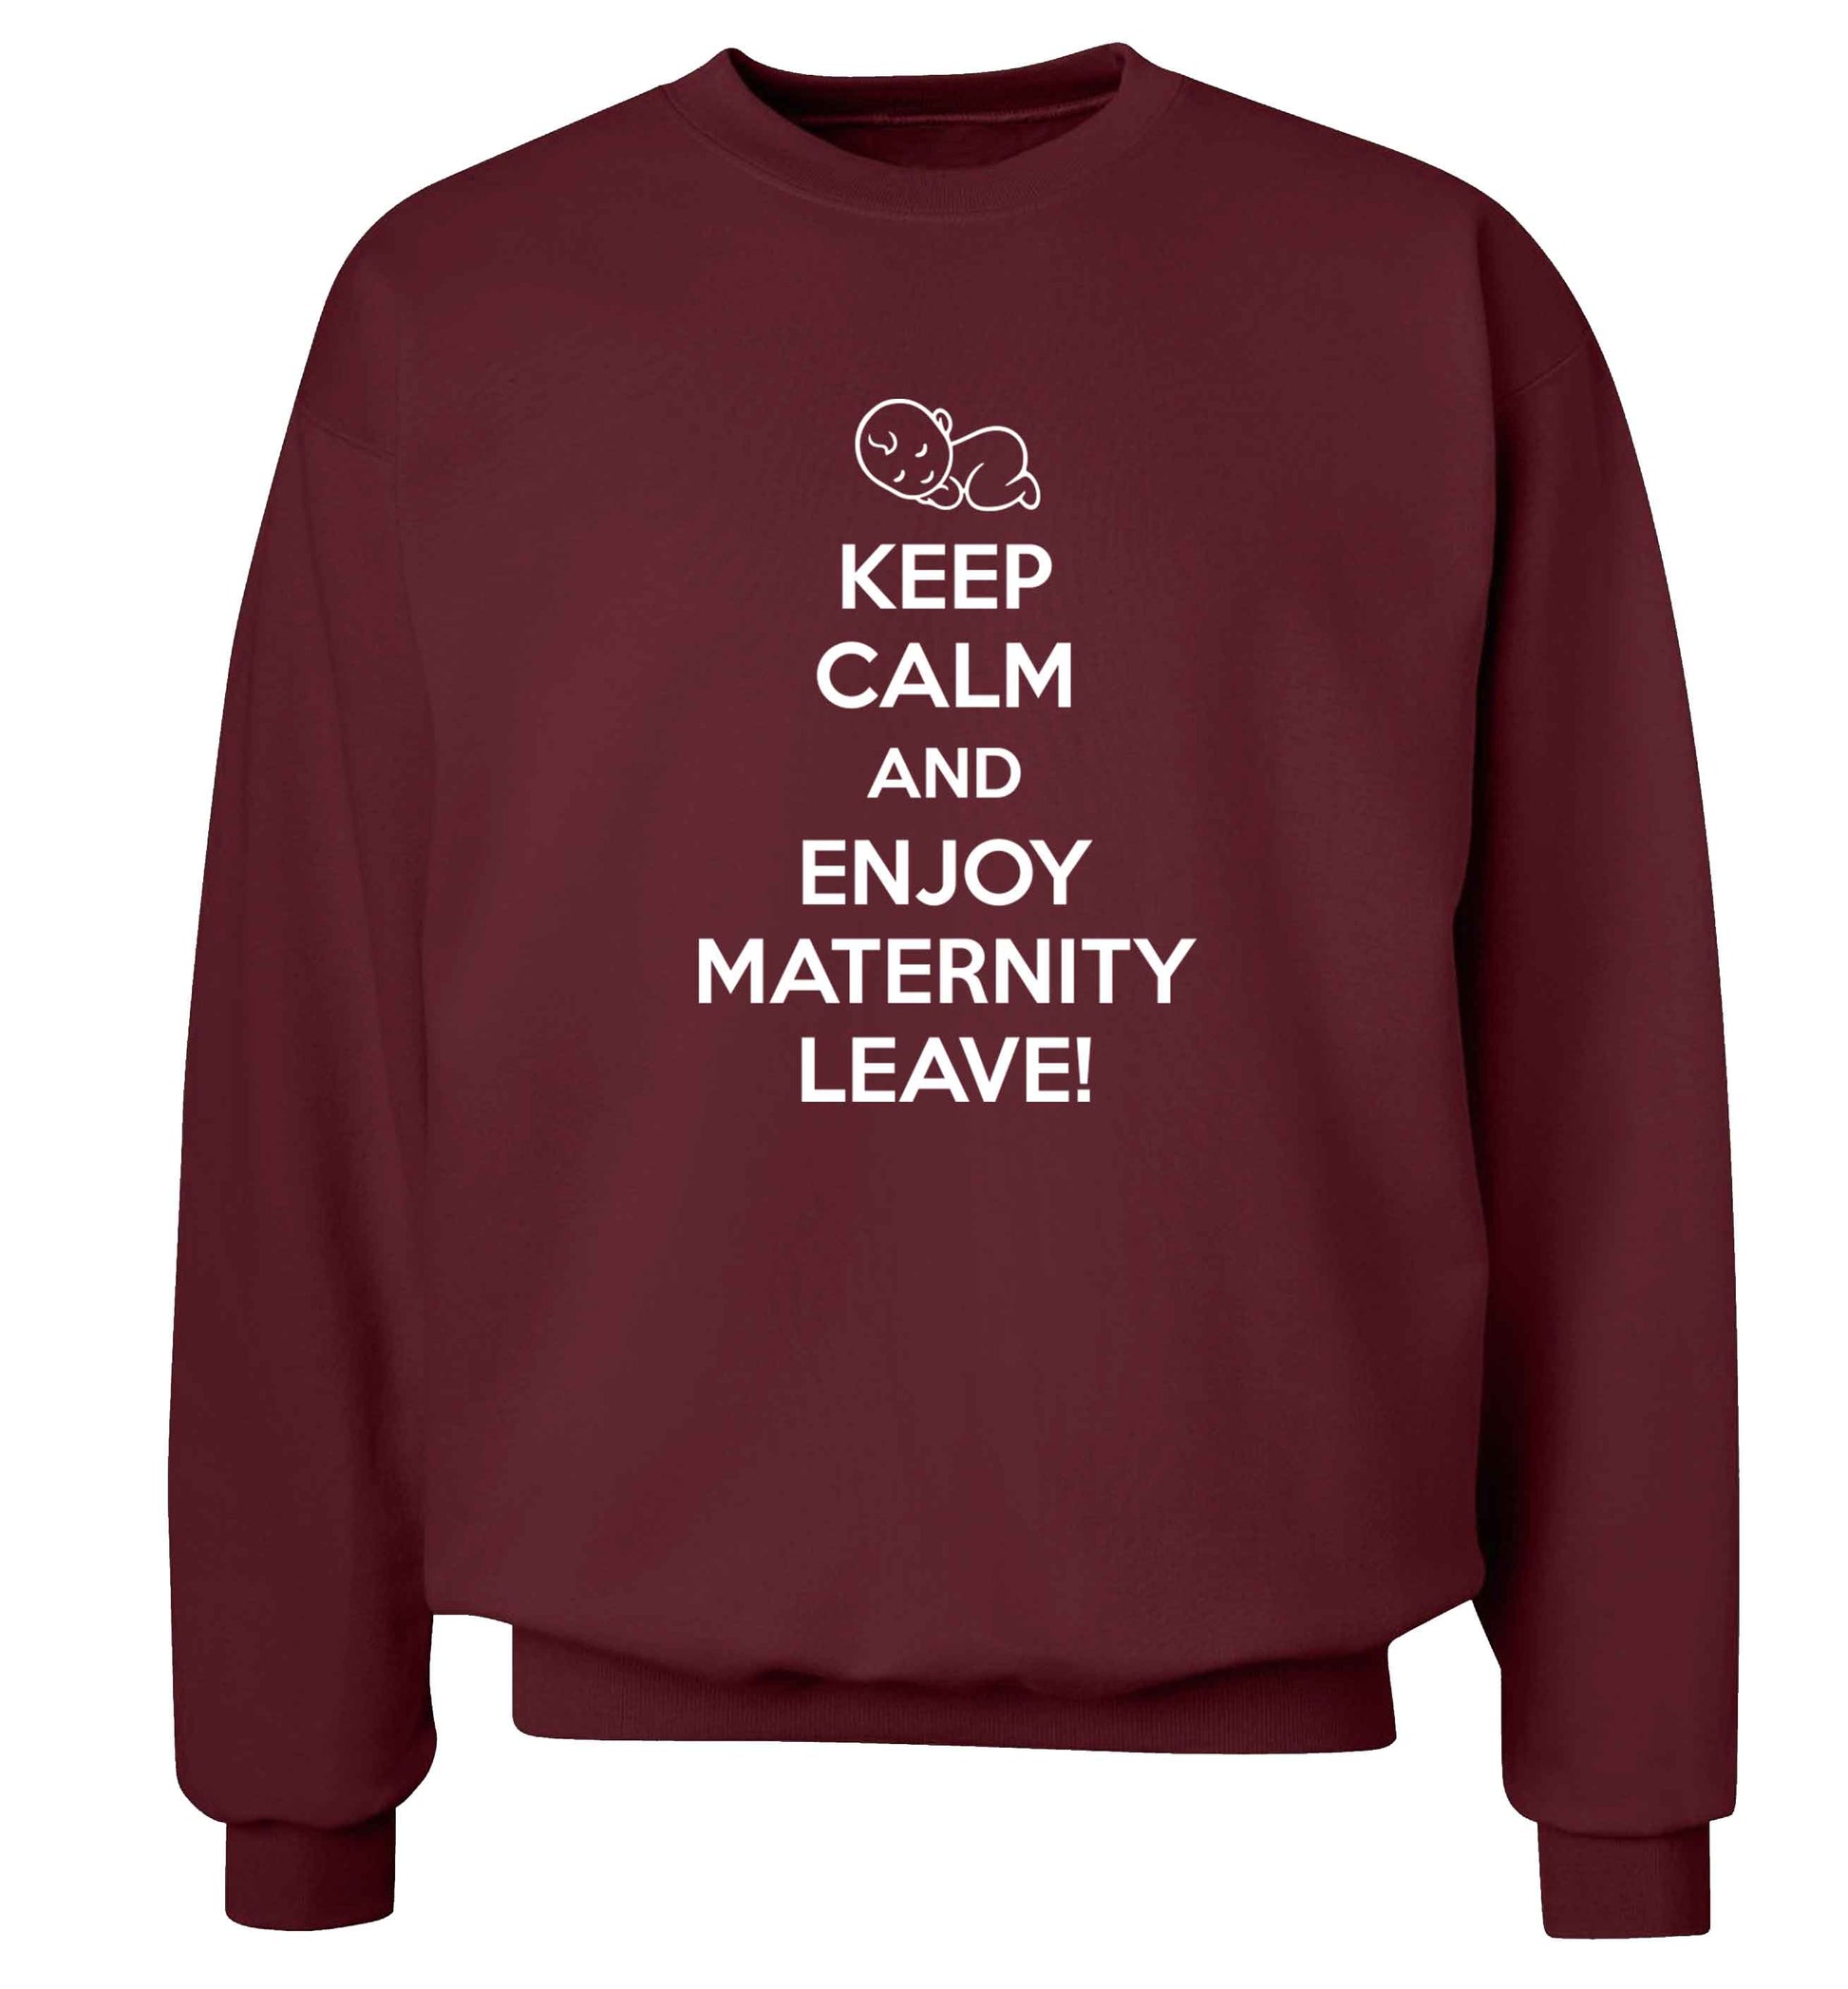 Keep calm and enjoy maternity leave Adult's unisex maroon Sweater 2XL